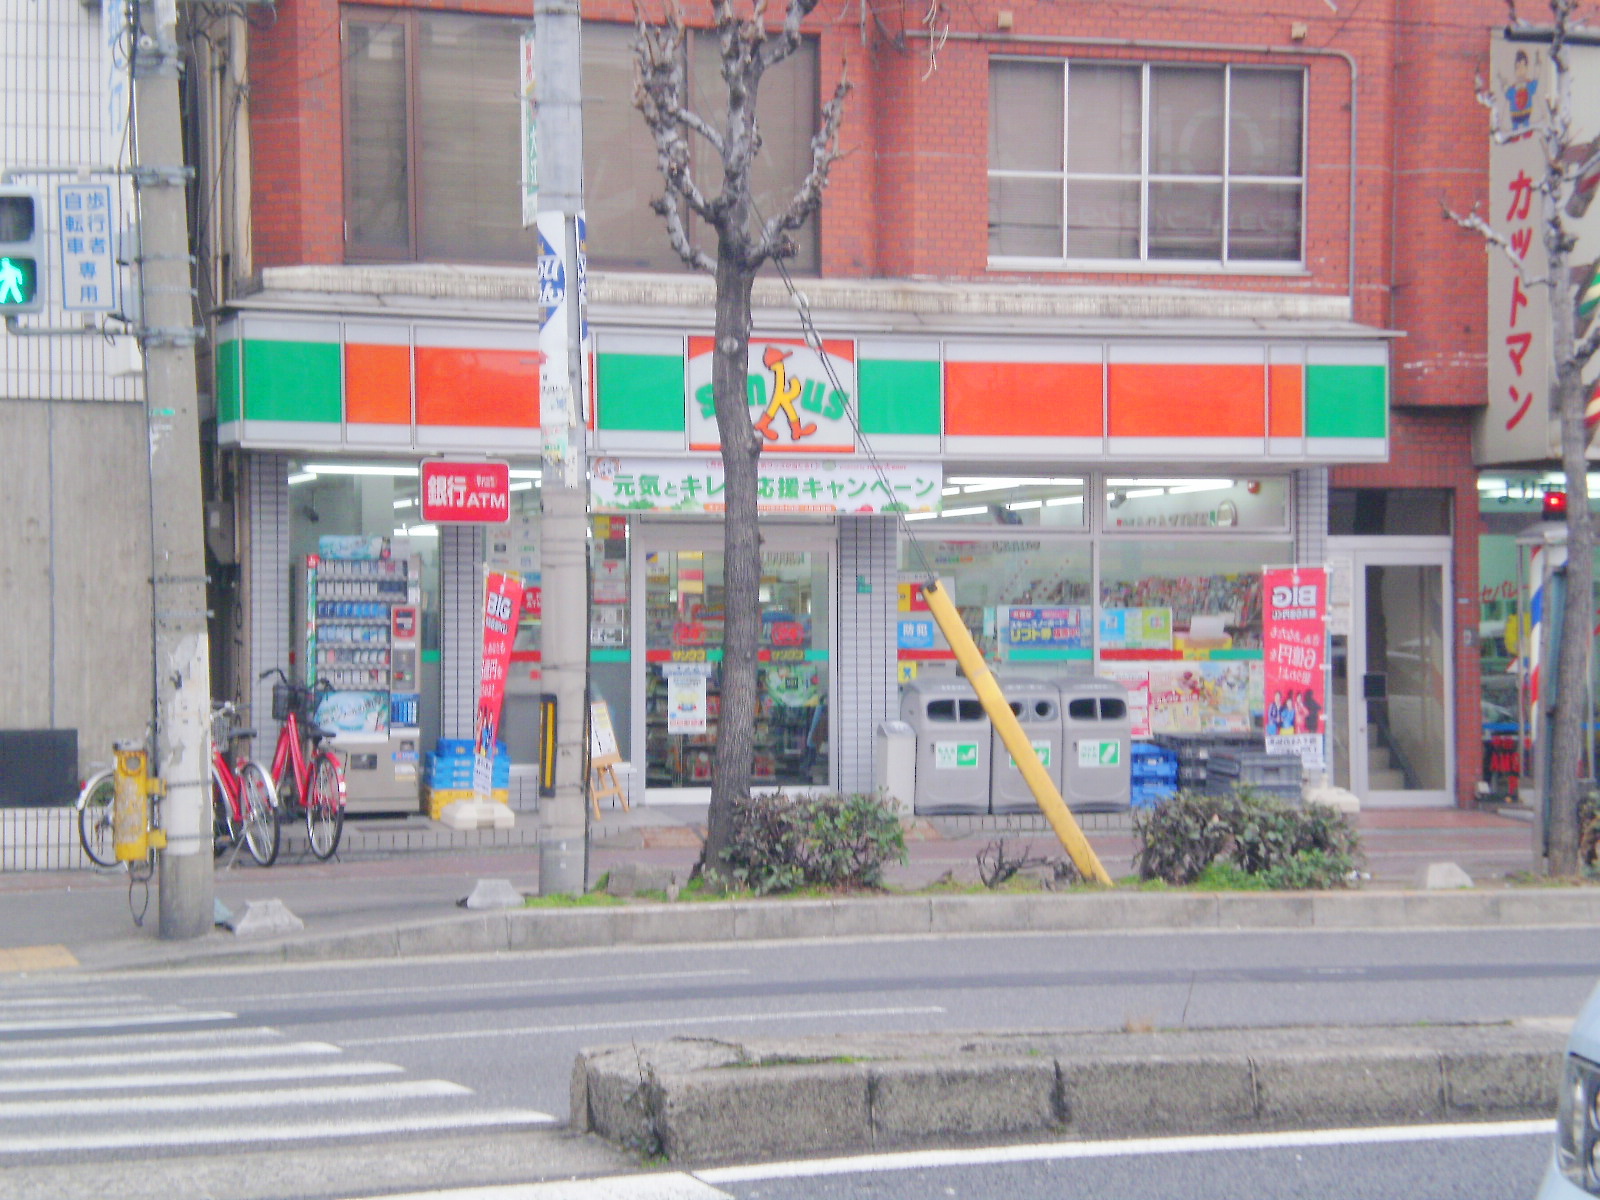 Convenience store. 291m until Thanksgiving Kire 2-chome (convenience store)